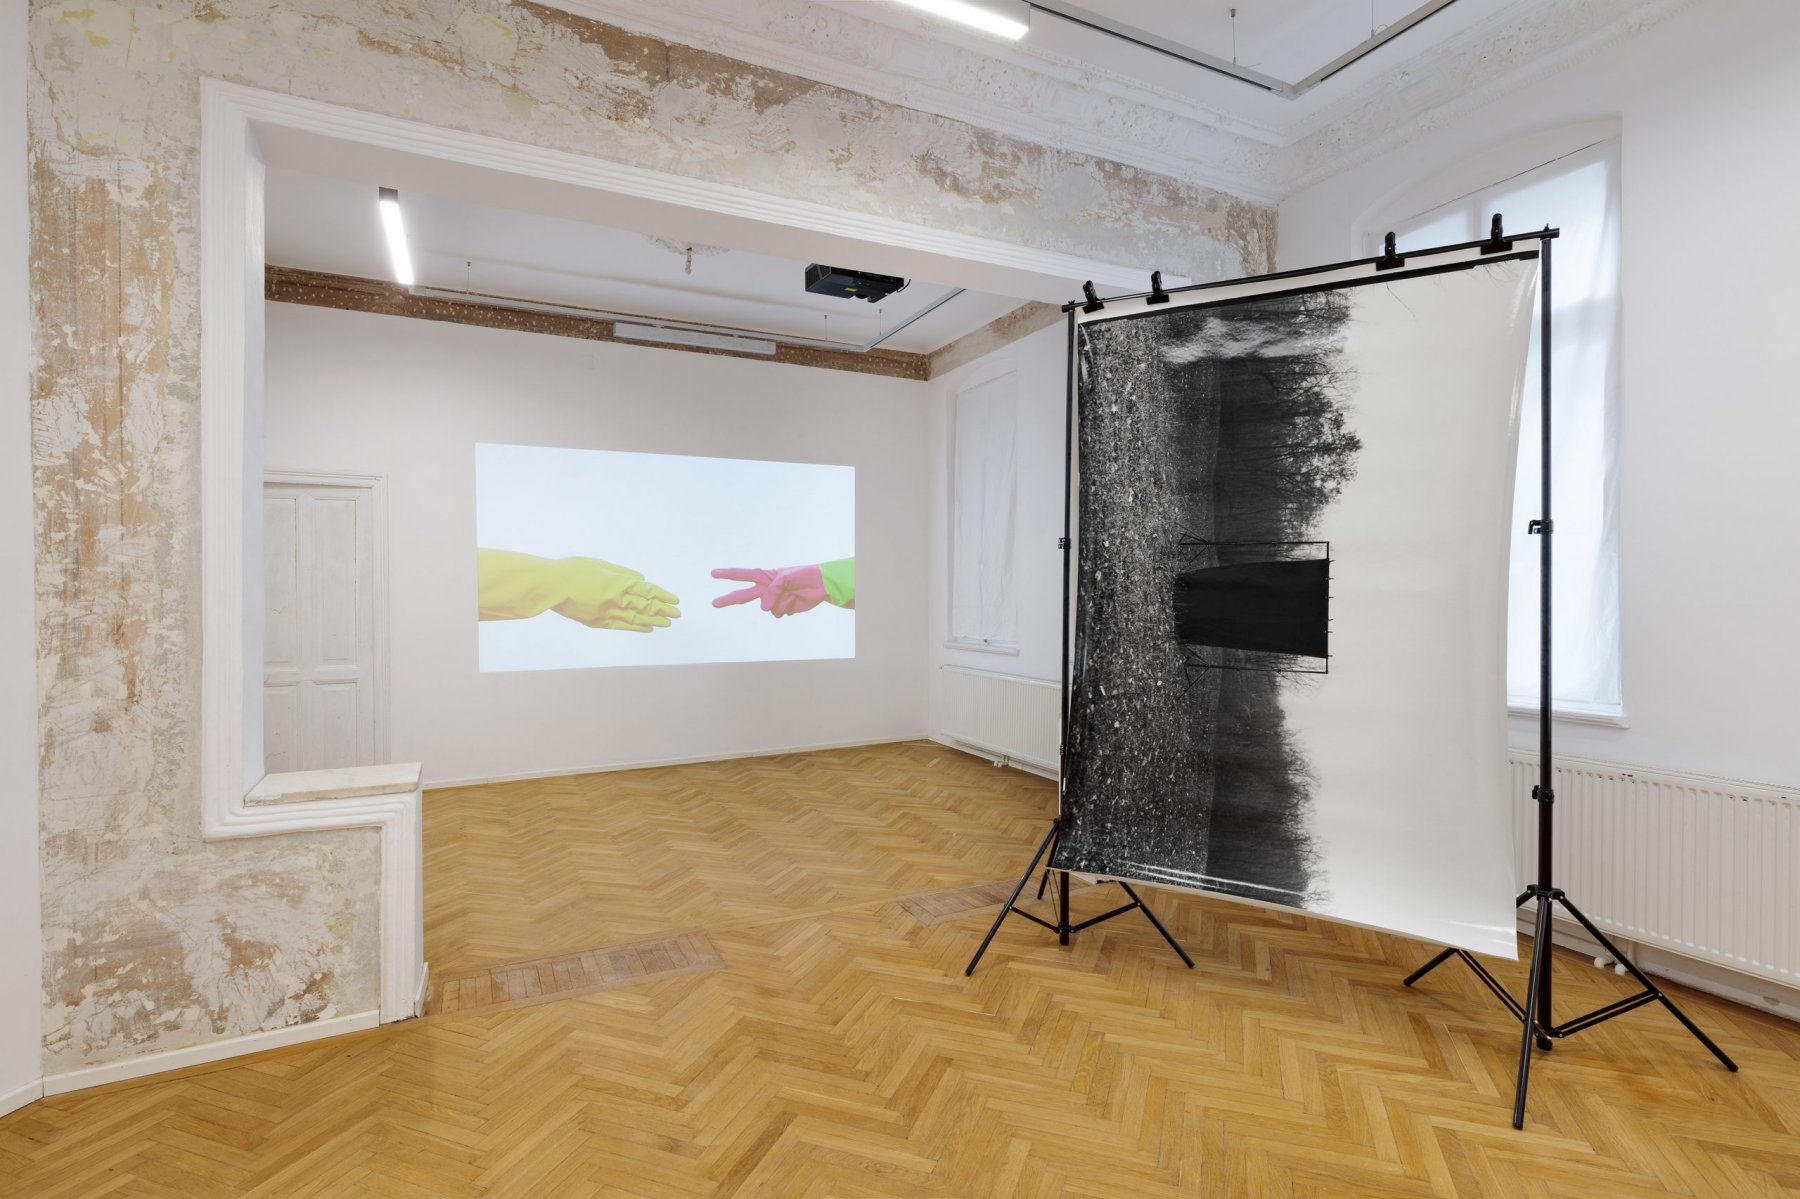 Installation image for The Show That Never Was, at Anca Poterașu Gallery